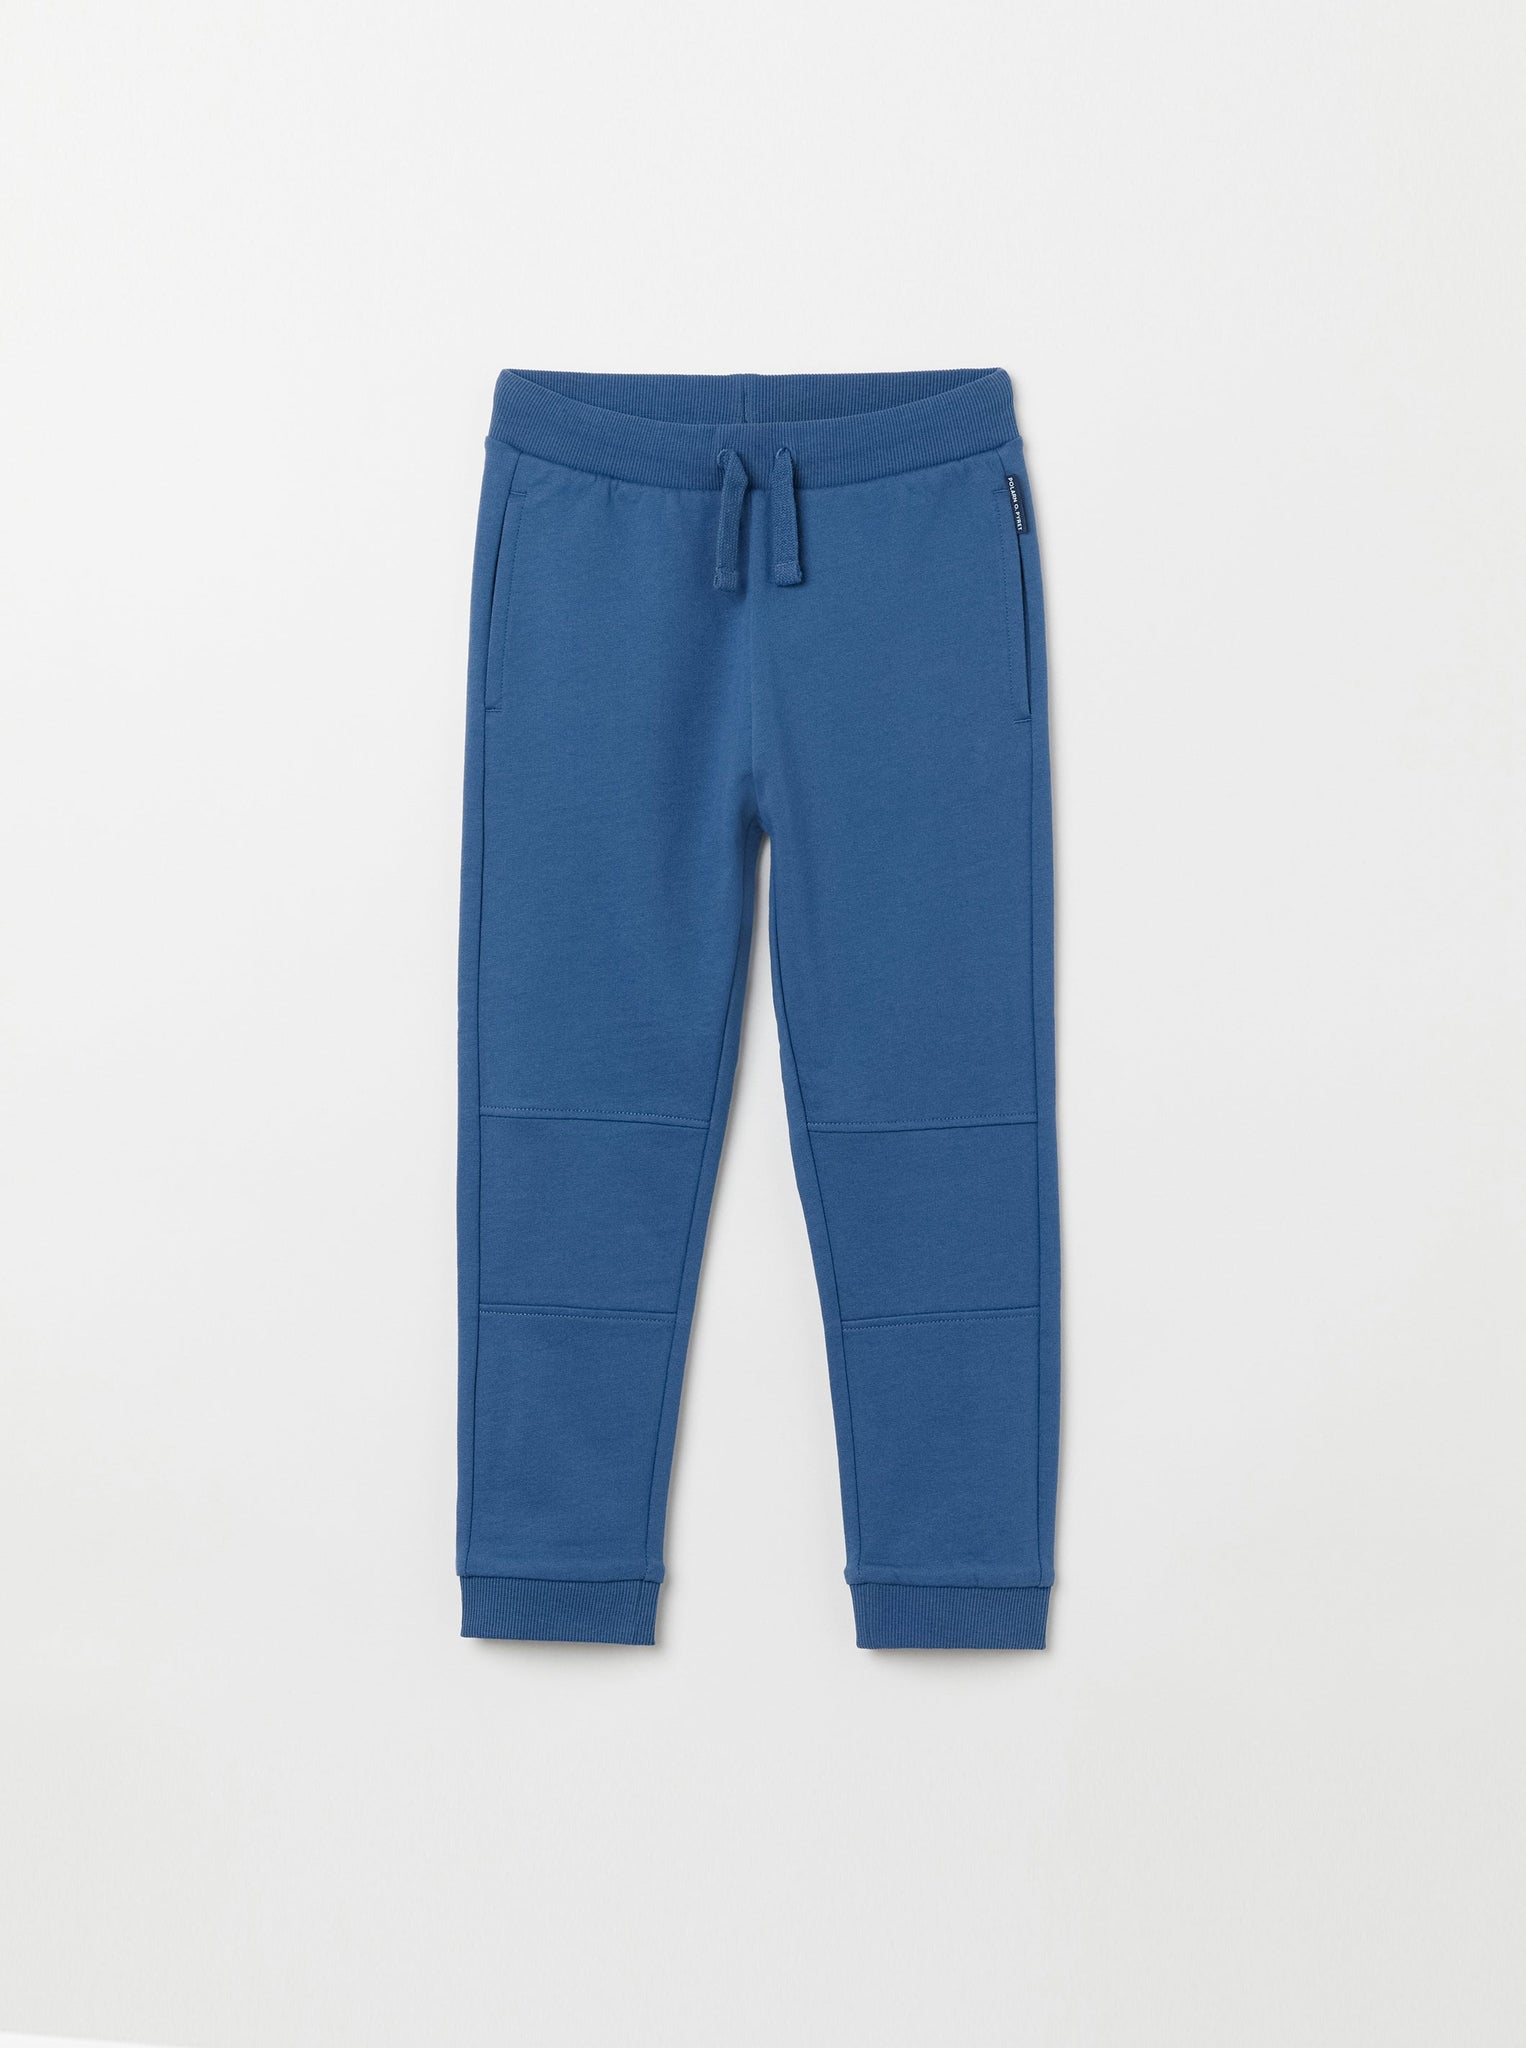 Organic Cotton Blue Kids Joggers from the Polarn O. Pyret Kidswear collection. Nordic kids clothes made from sustainable sources.